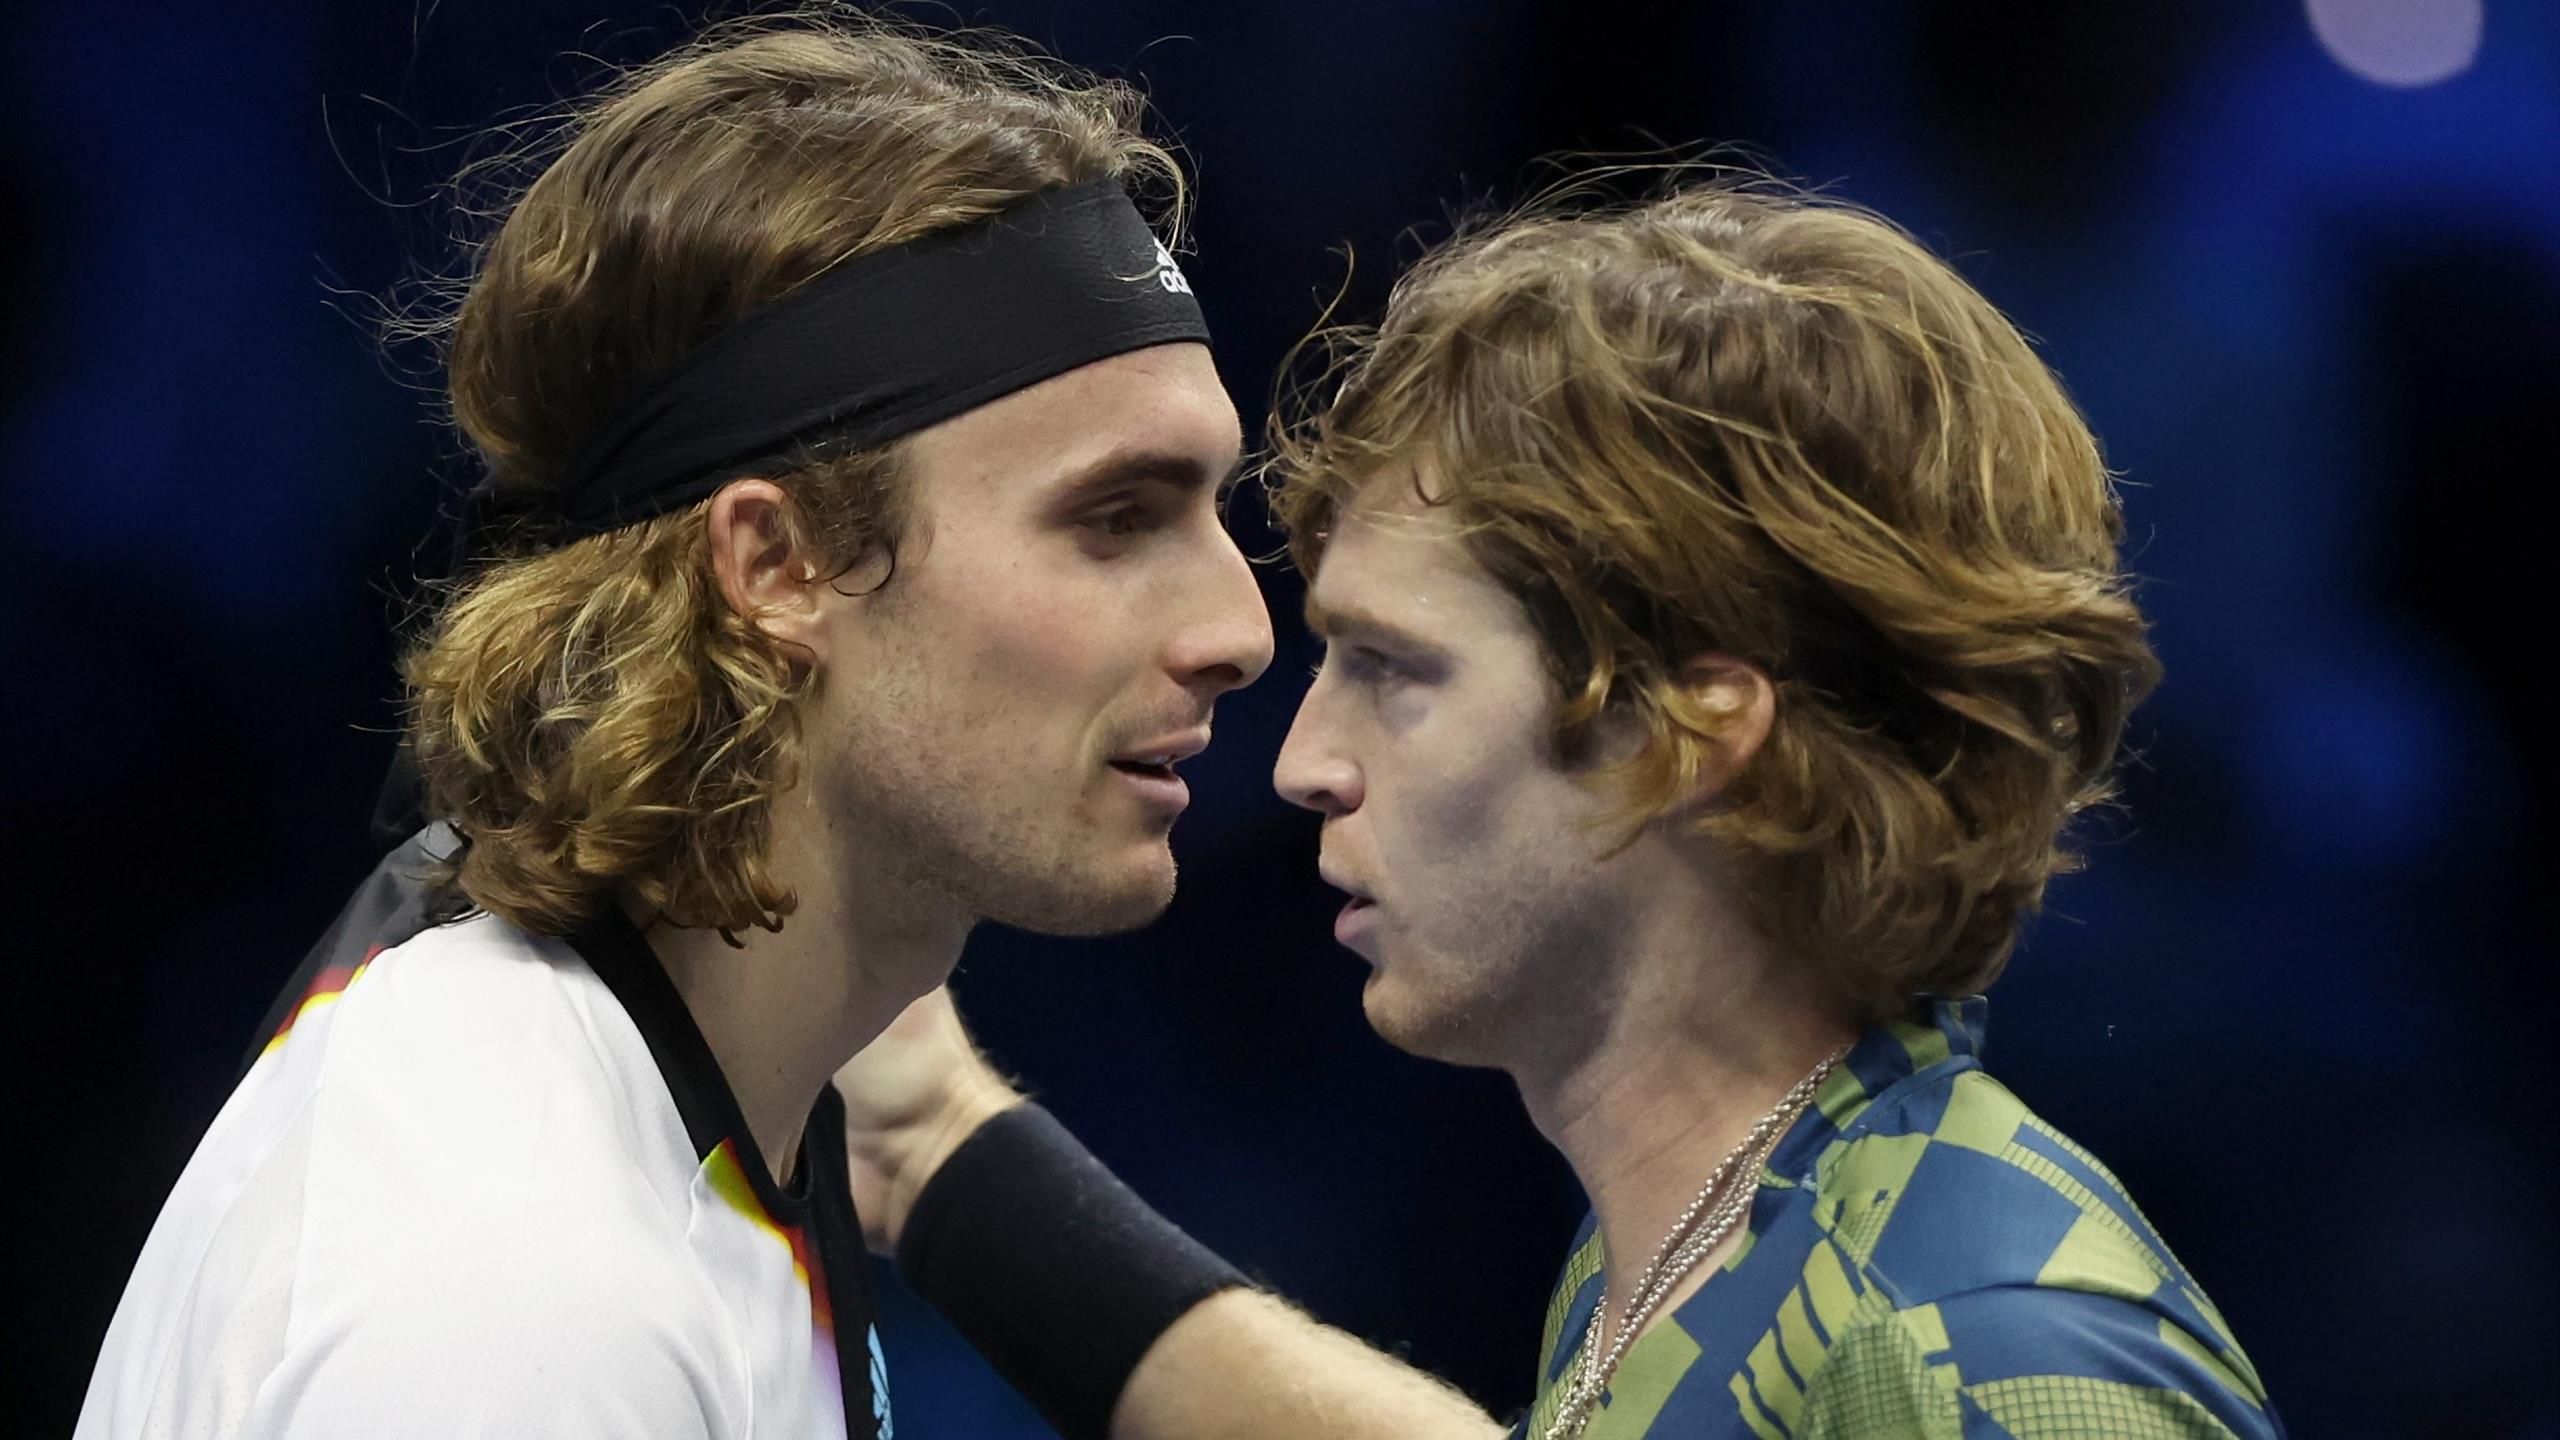 Stefanos Tsitsipas apologises to Andrey Rublev for saying he has few tools at ATP Finals, says he regrets remarks